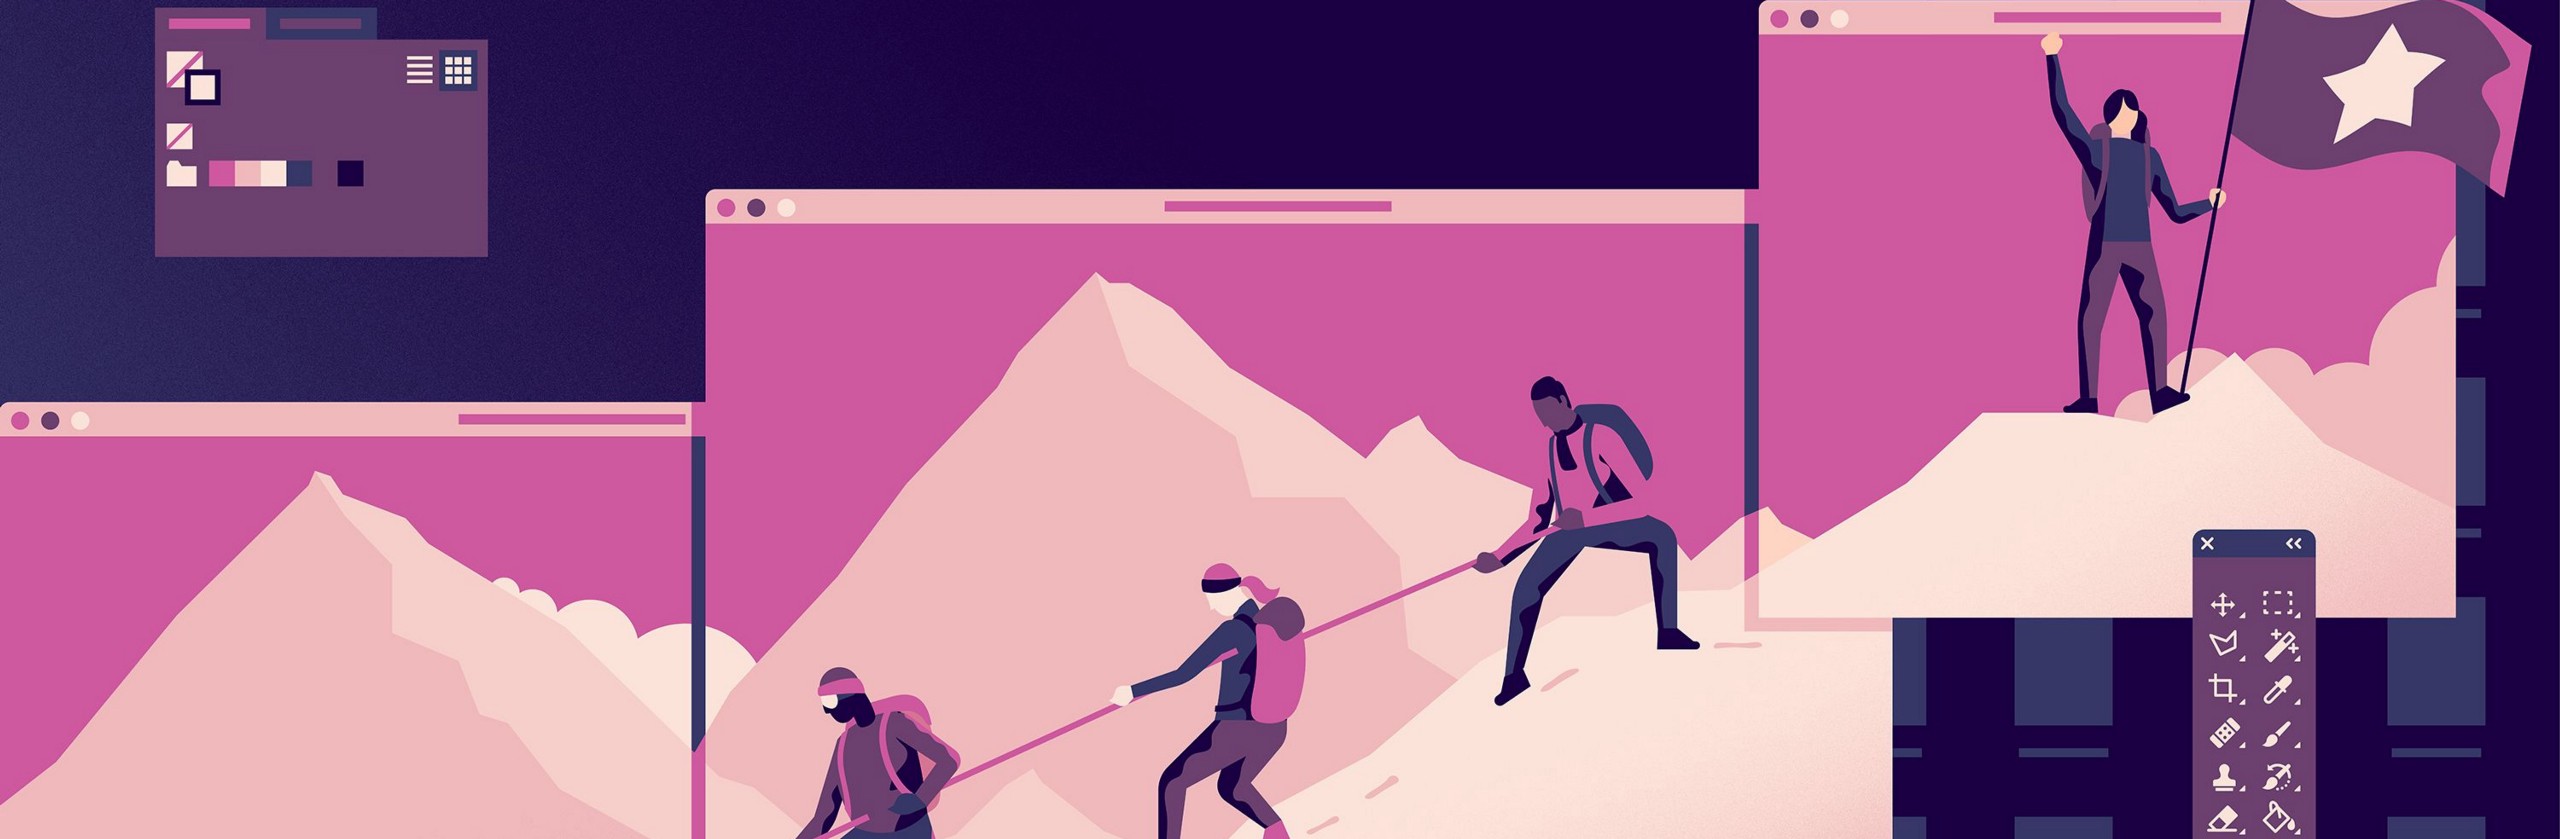 Illustrated people climbing a mountain across multiple canvases in a design package, Photoshop